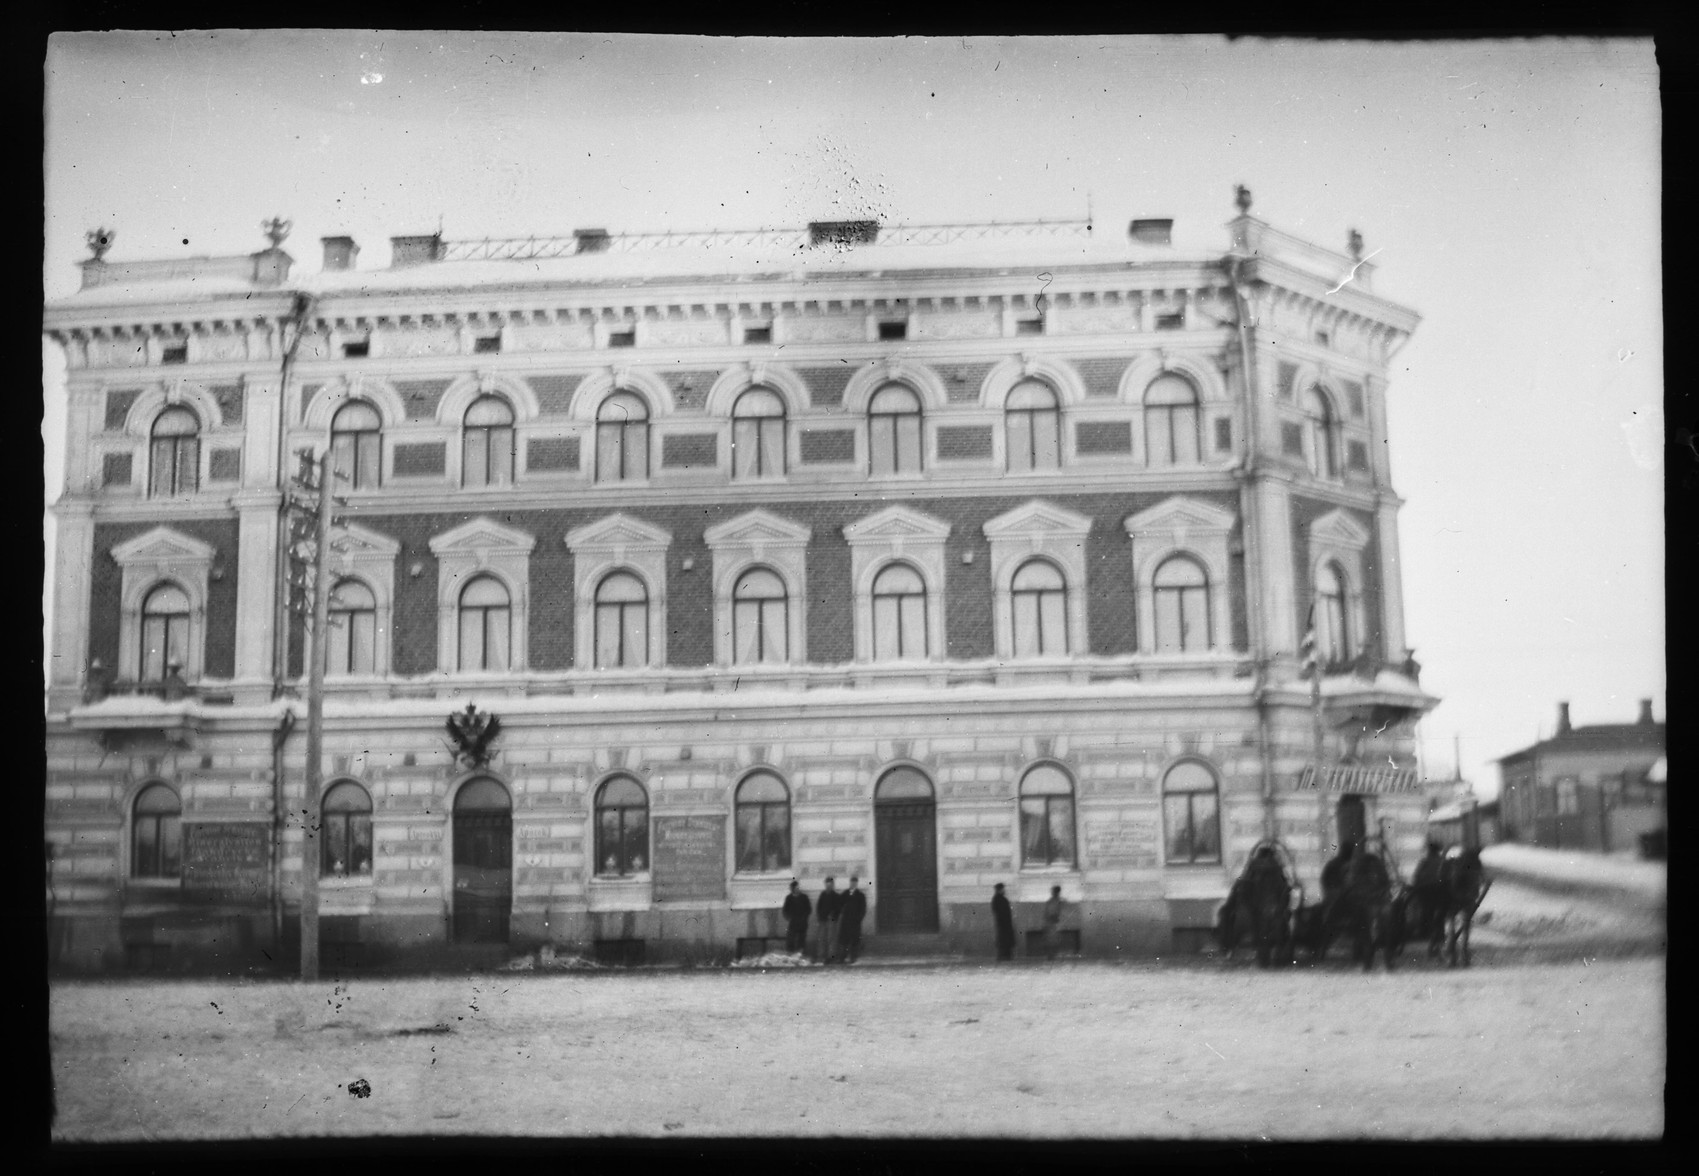 some people and horses standing in front of a building